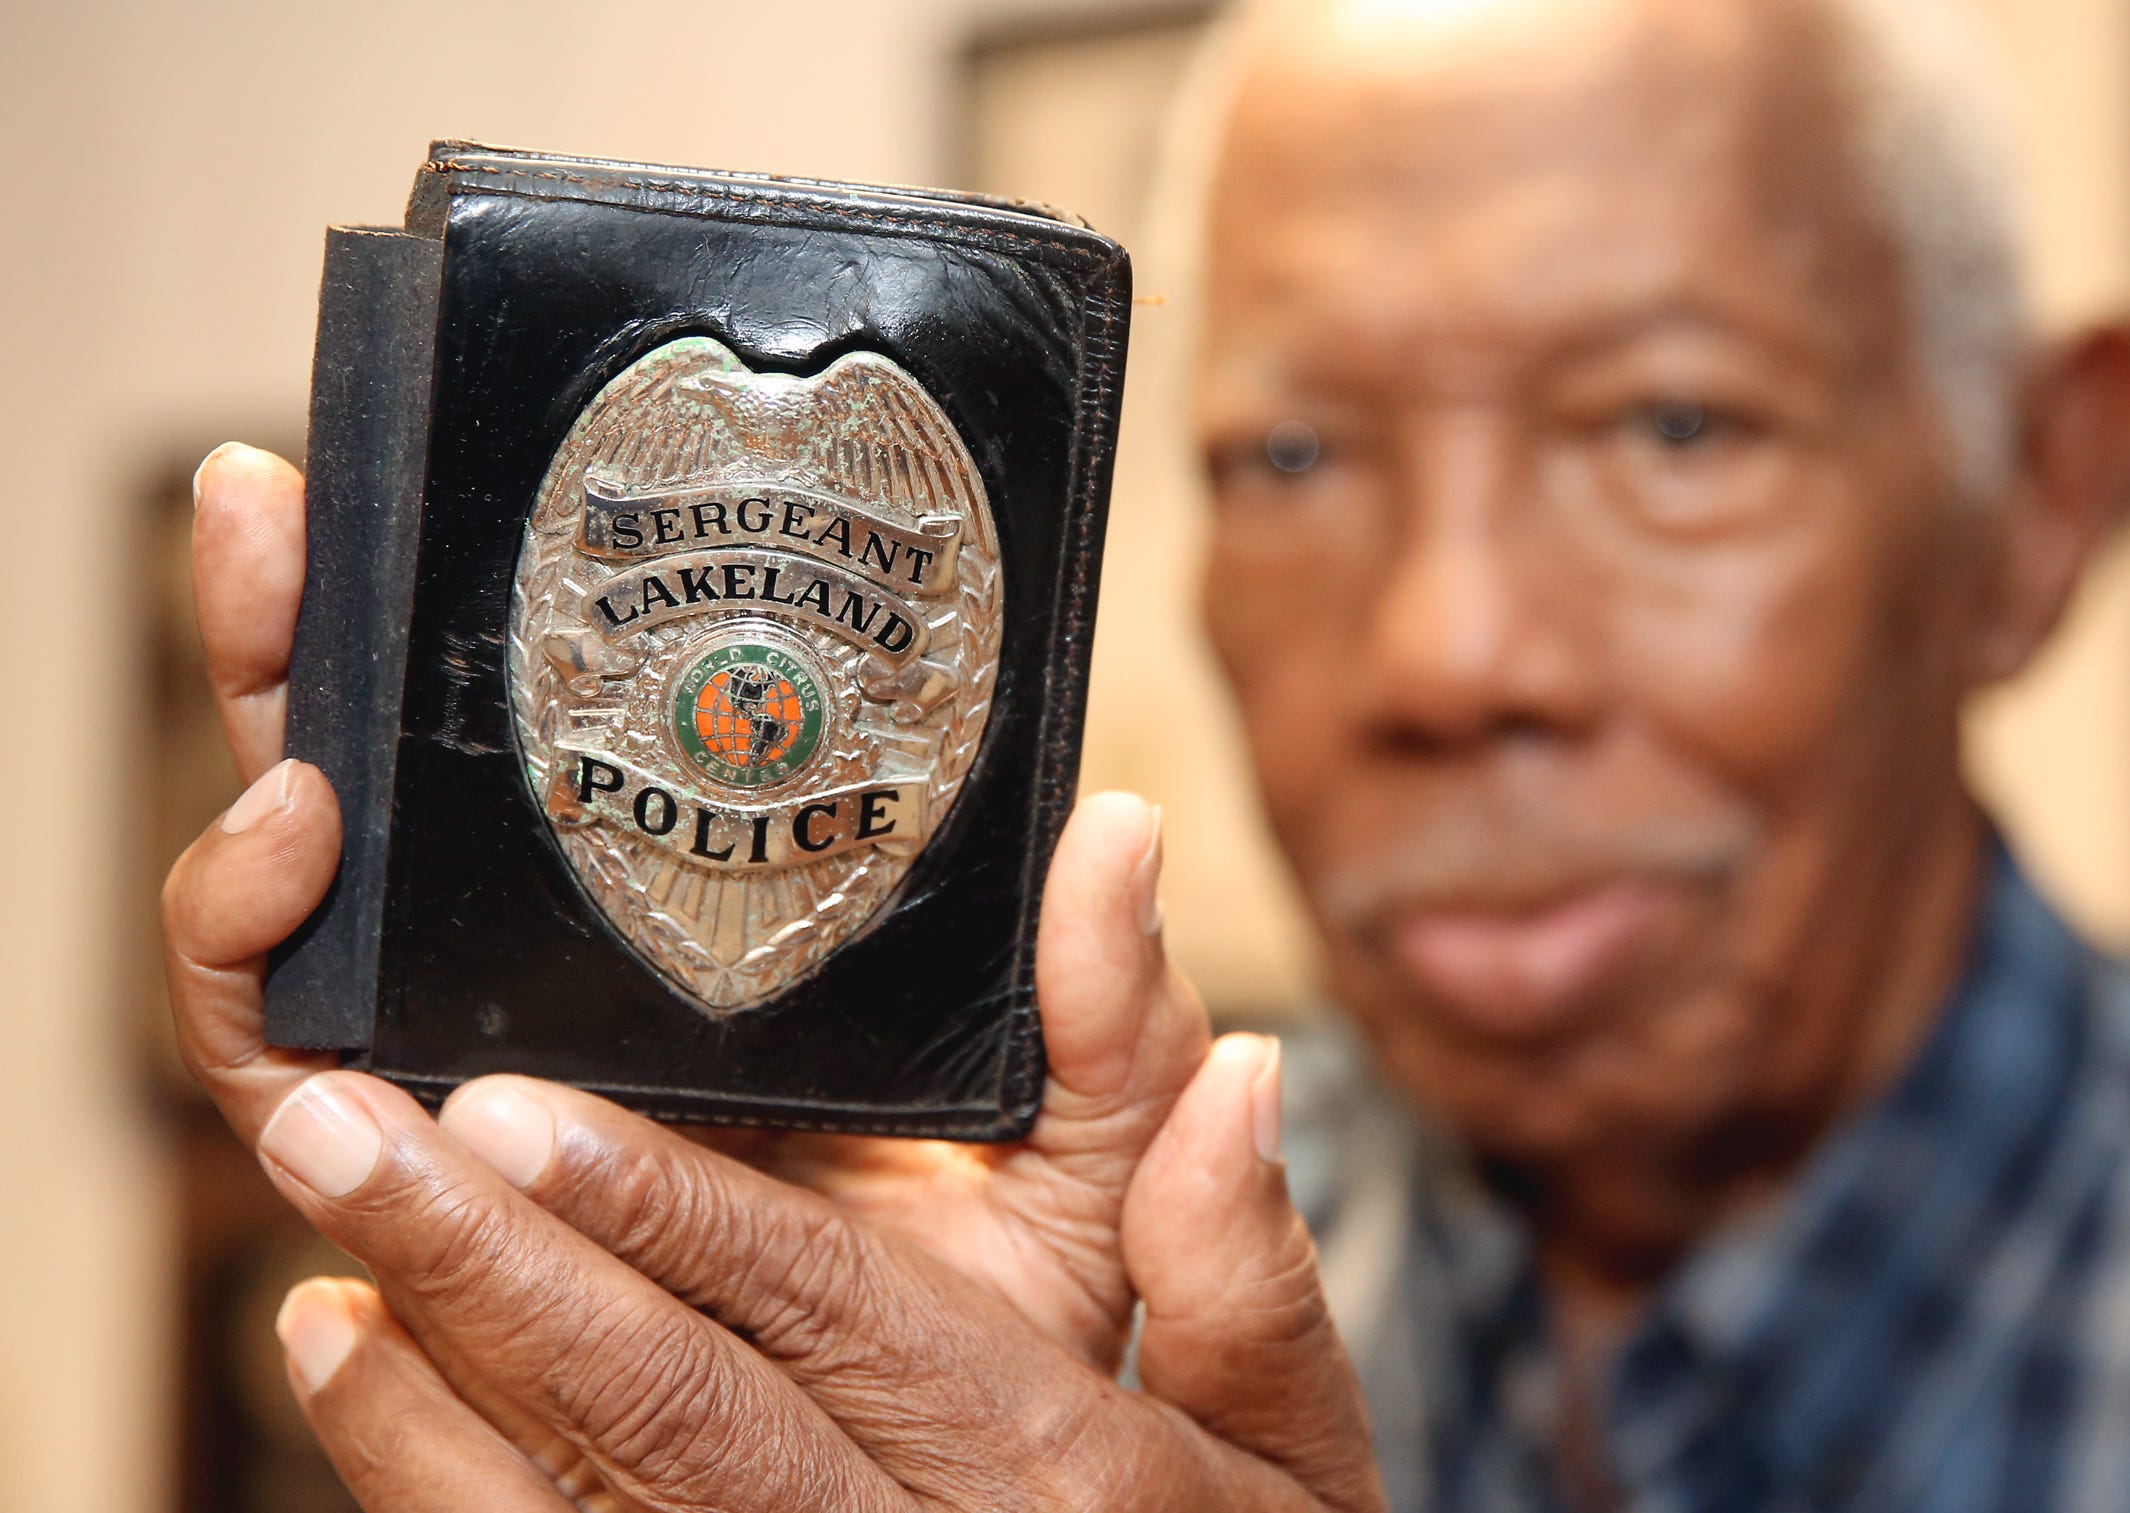 Edgar Pickett, retired Lakeland Police Department sergeant, is pictured with his badge at his home in Lakeland in this file photo. Pickett was the first Black detective and first forensic specialist for LPD.